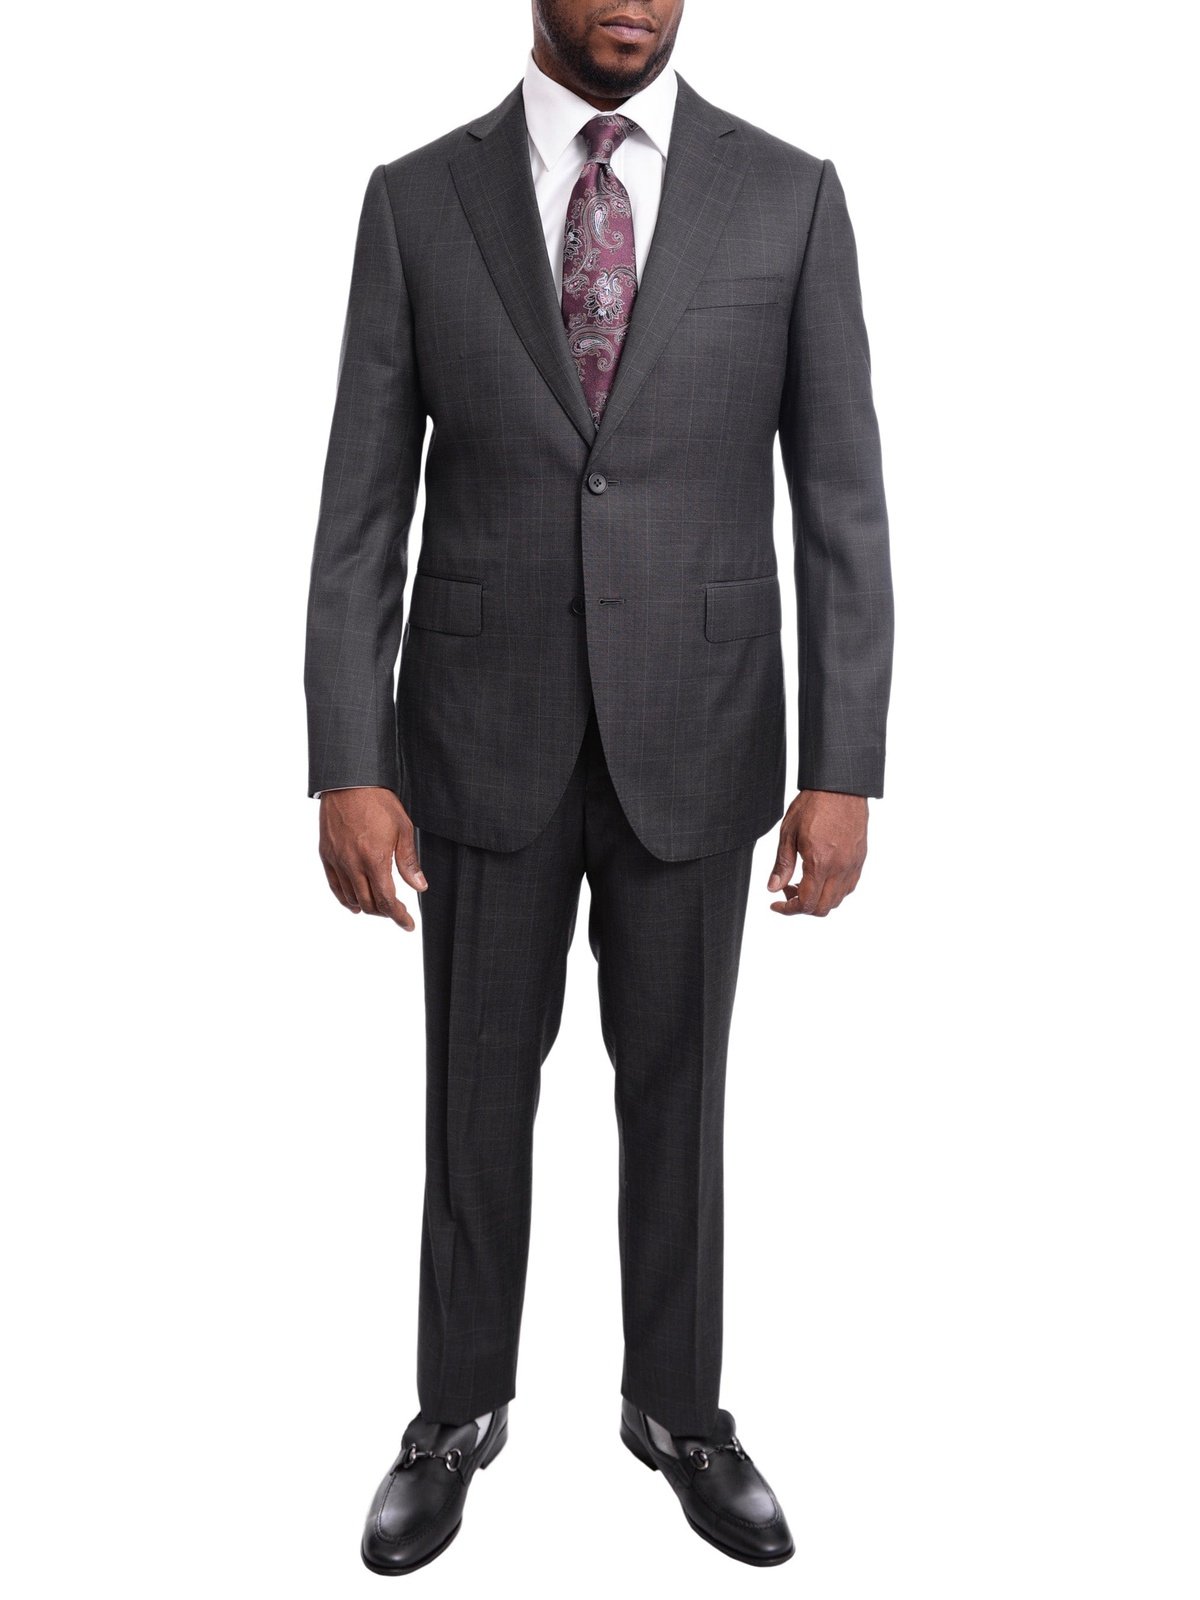 Napoli TWO PIECE SUITS Napoli Slim Fit Charcoal Gray Windowpane Two Button Half Canvassed Wool Suit